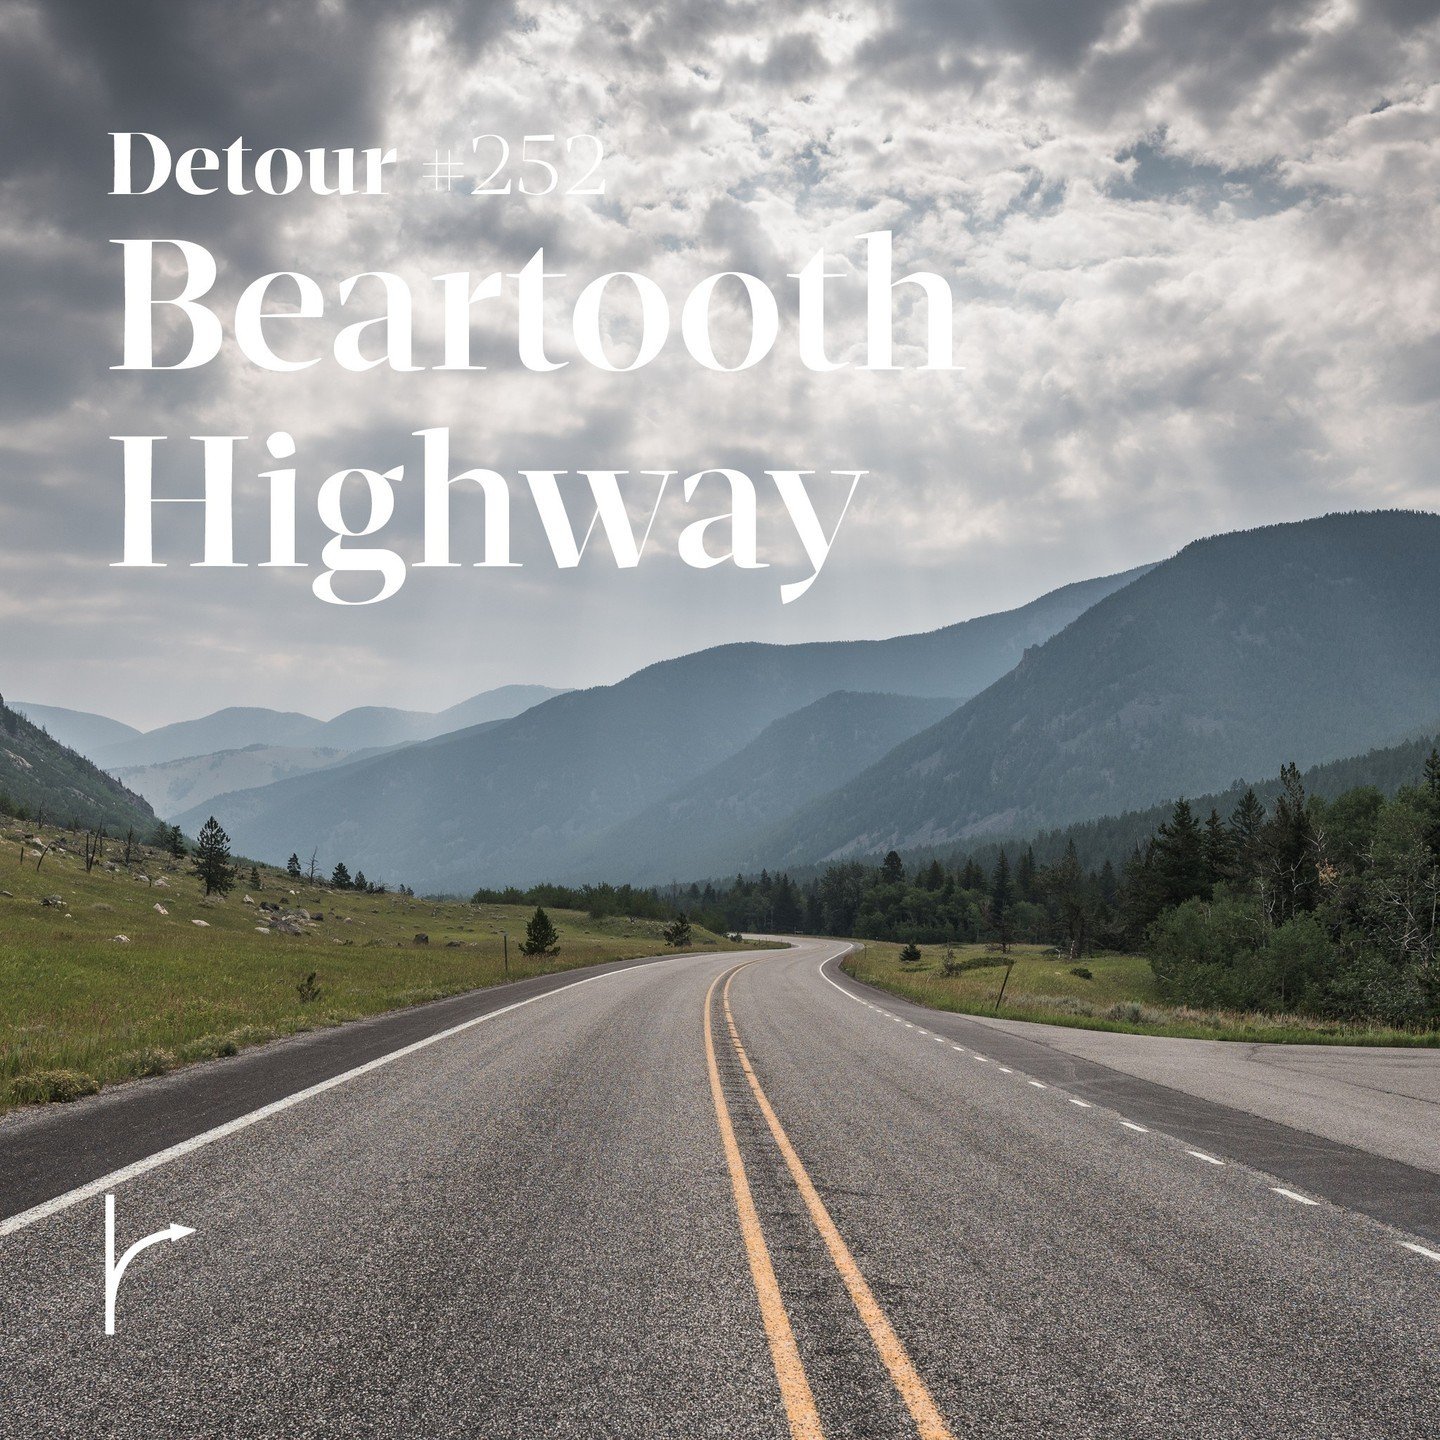 The greater the effort, the sweeter the reward. It&rsquo;s a phrase that couldn&rsquo;t be more true of braving the Beartooth Highway.⁠
⁠
This All-American Road, which means that it counts as a unique tourist attraction in its own right, requires a g